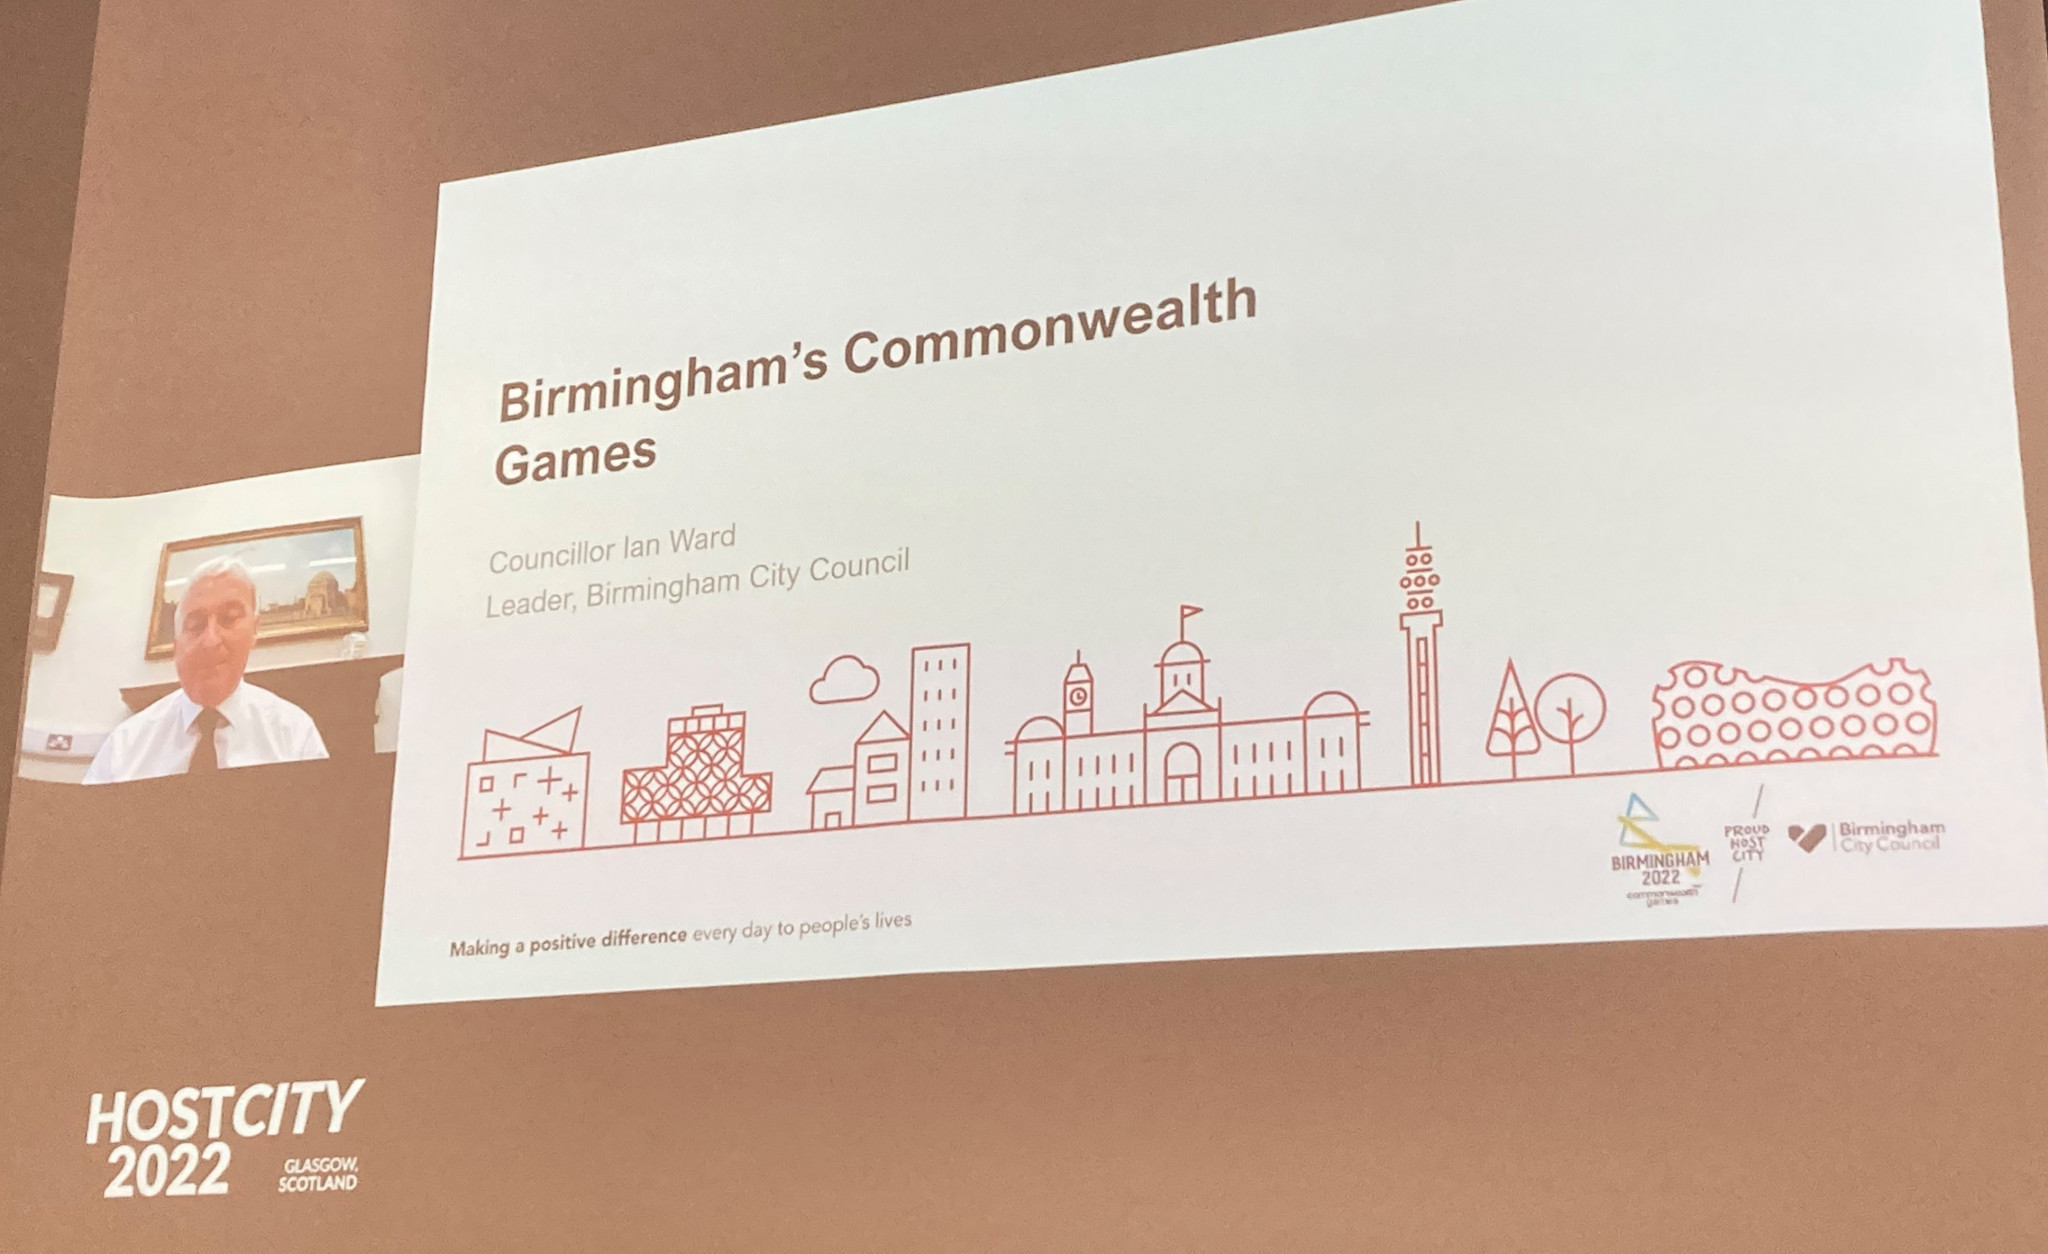 Birmingham City Council Leader Ian Ward shared the city's experience of staging the Birmingham 2022 Commonwealth Games to Host City 2022 ©ITG